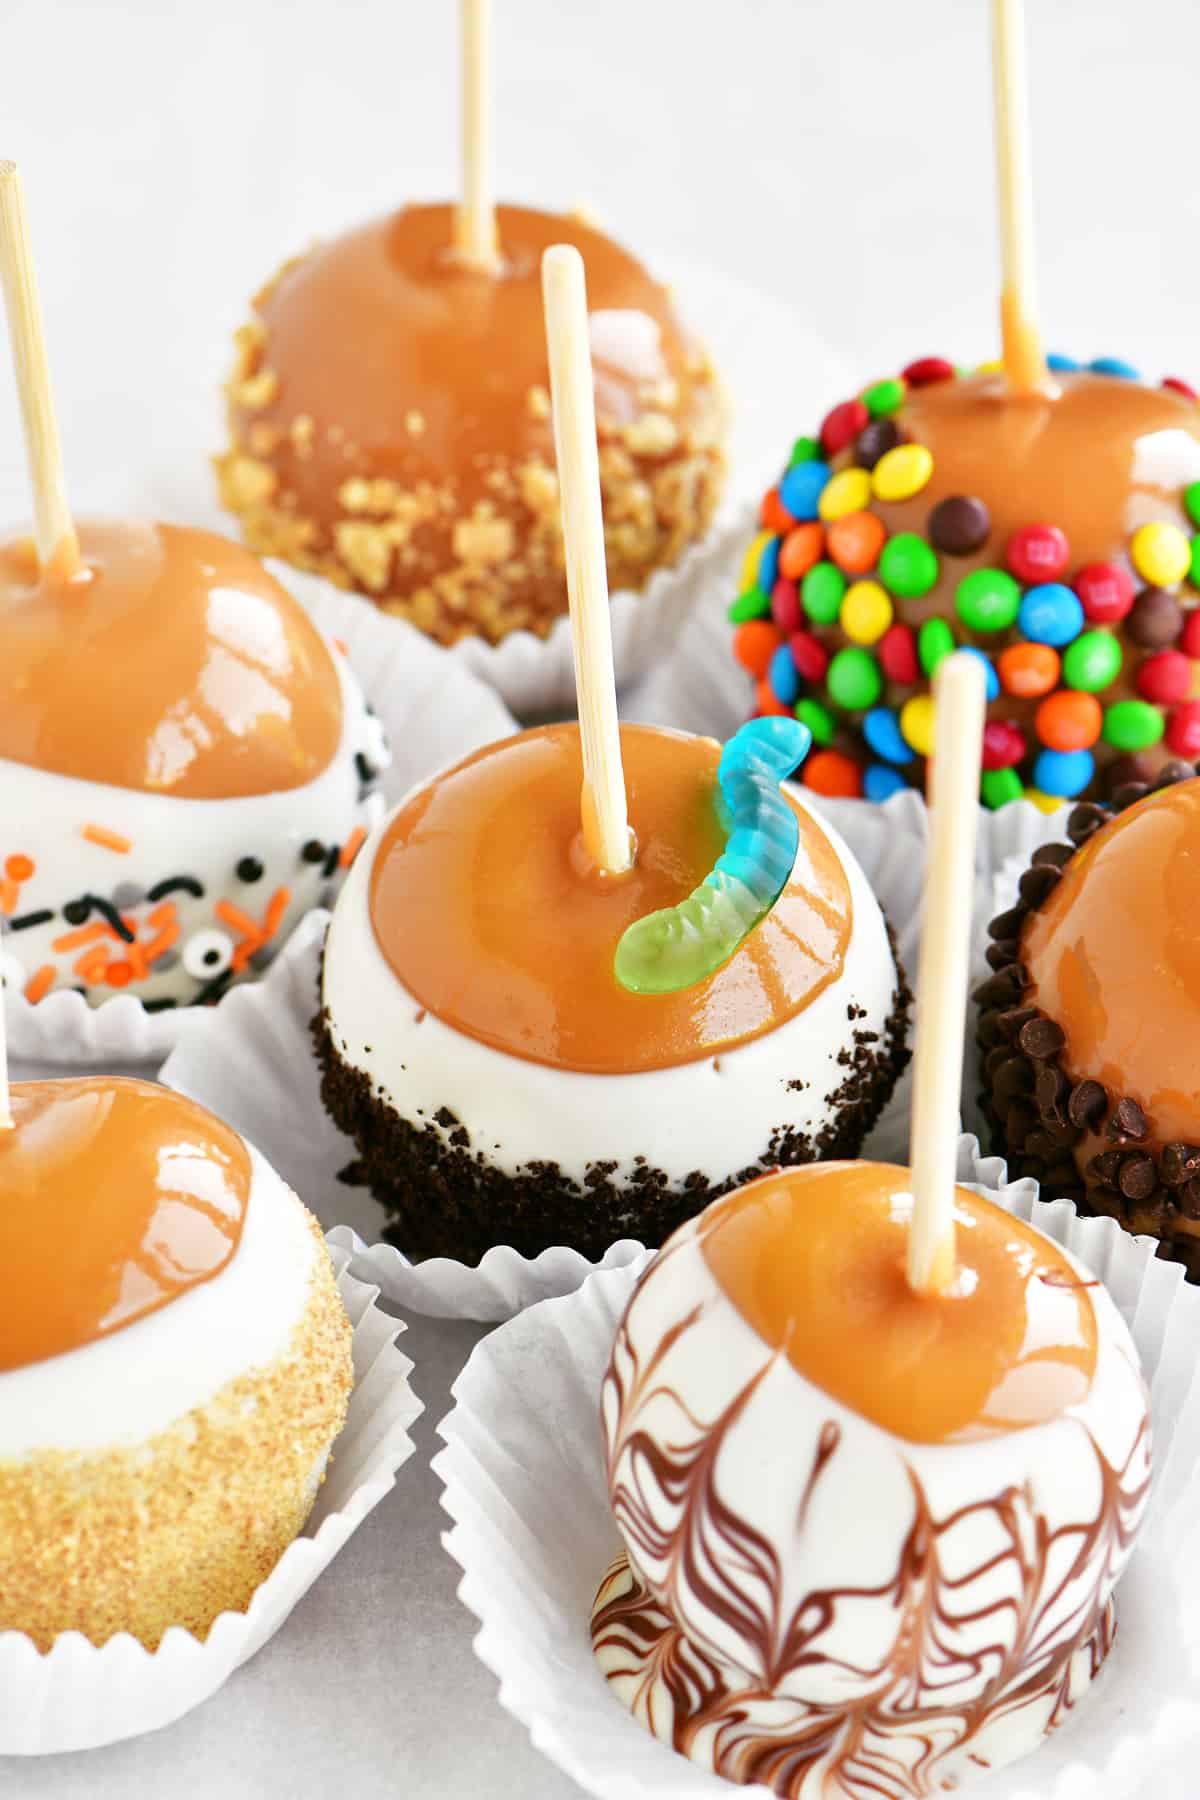 Best Candy Apples Recipe - How To Make Homemade Candy Apples